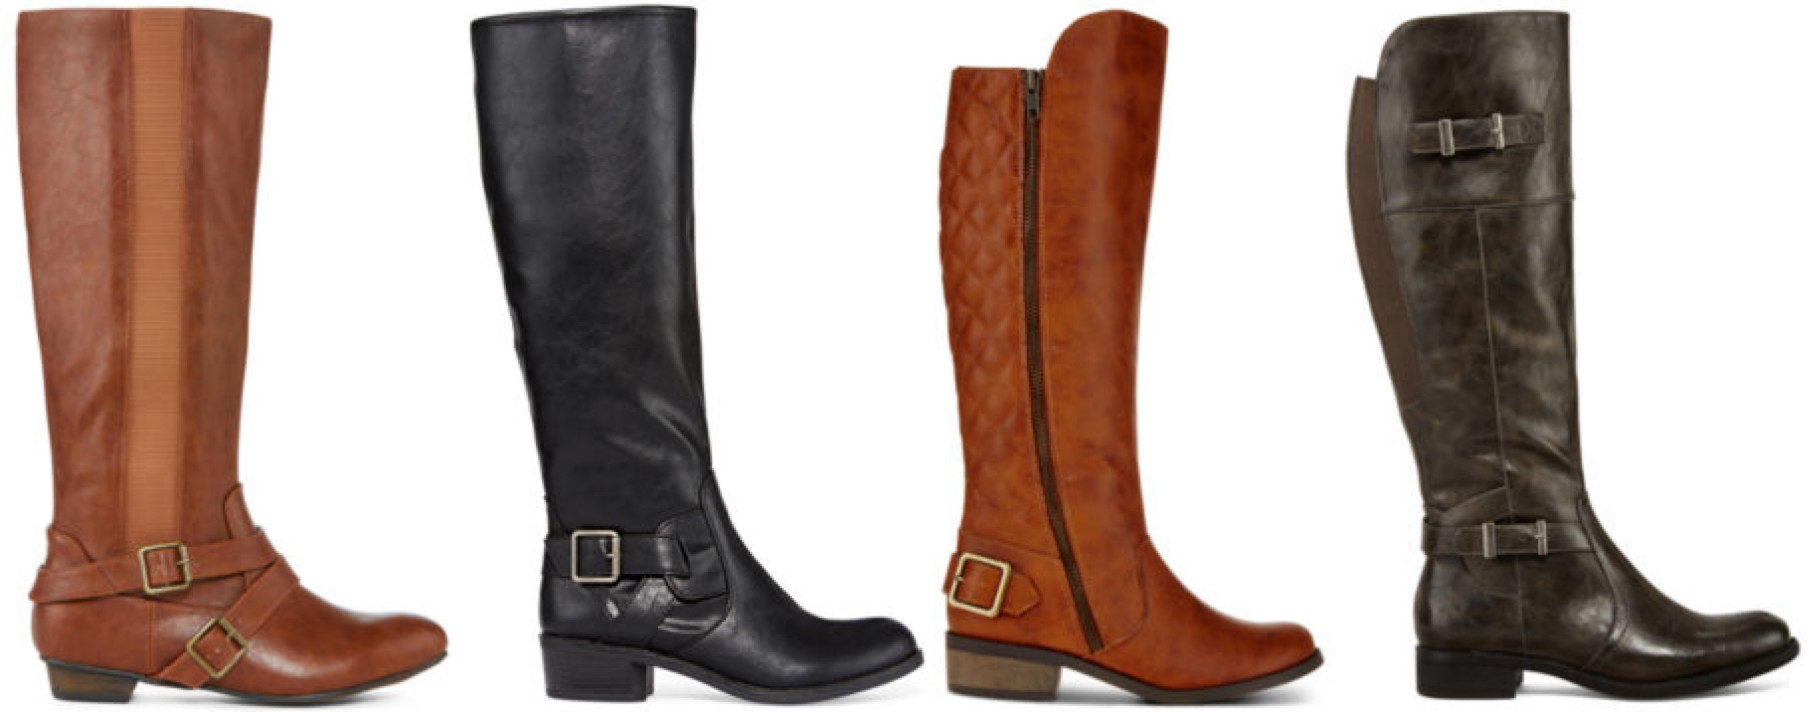 JCPenney: Extra $10 Off $25 Purchase = Women's Boots Only $19.99 (Reg. $90)